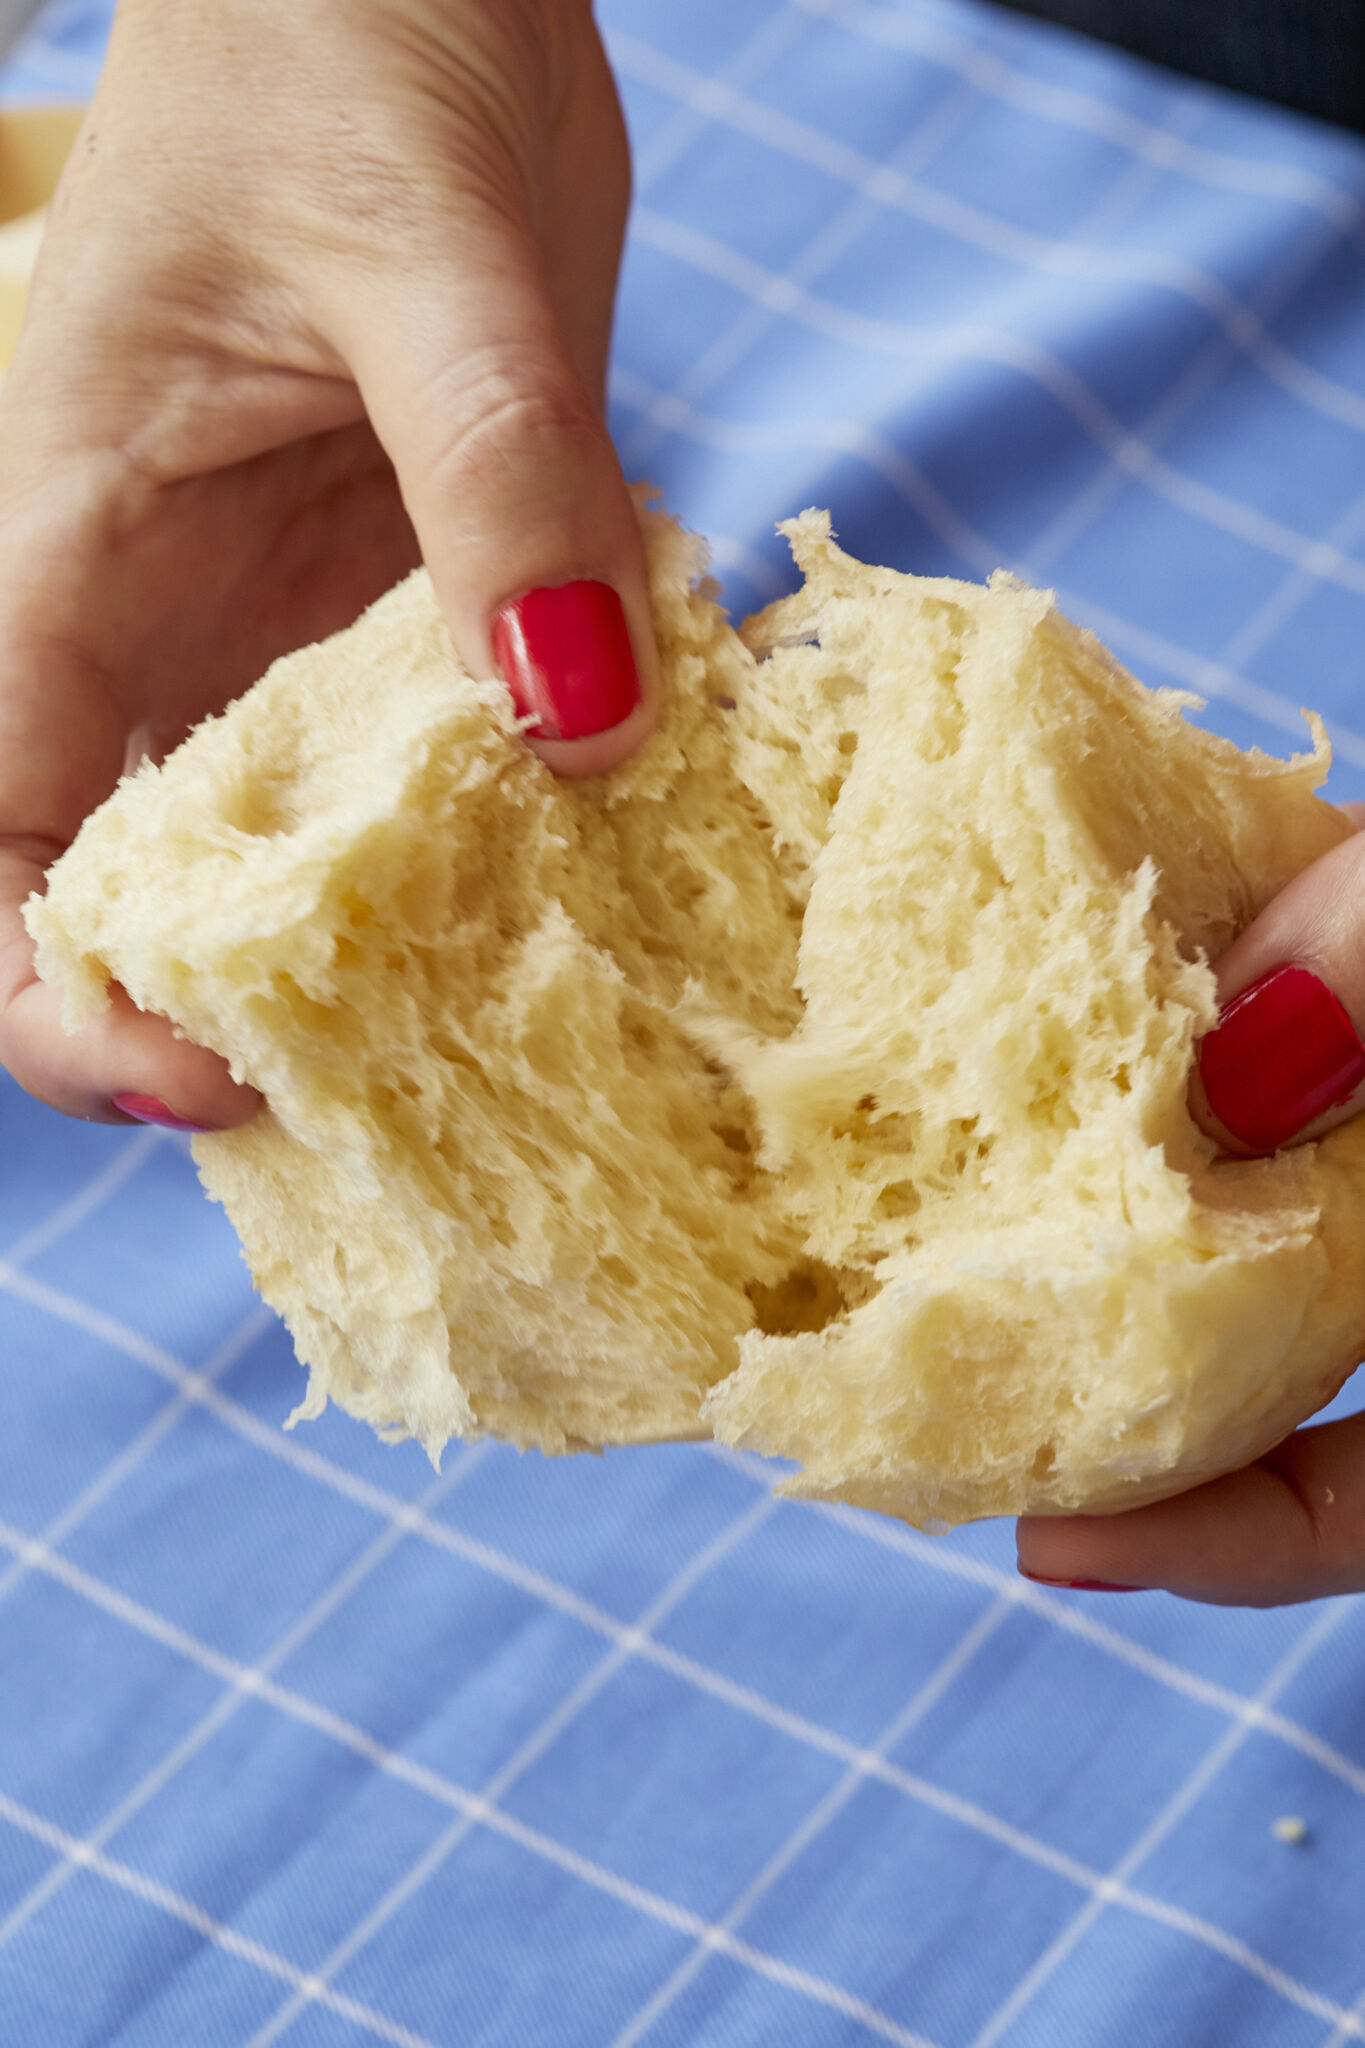 Splitting one dinner roll into half shows the soft interior, fine crumb and perfect gluten strands.